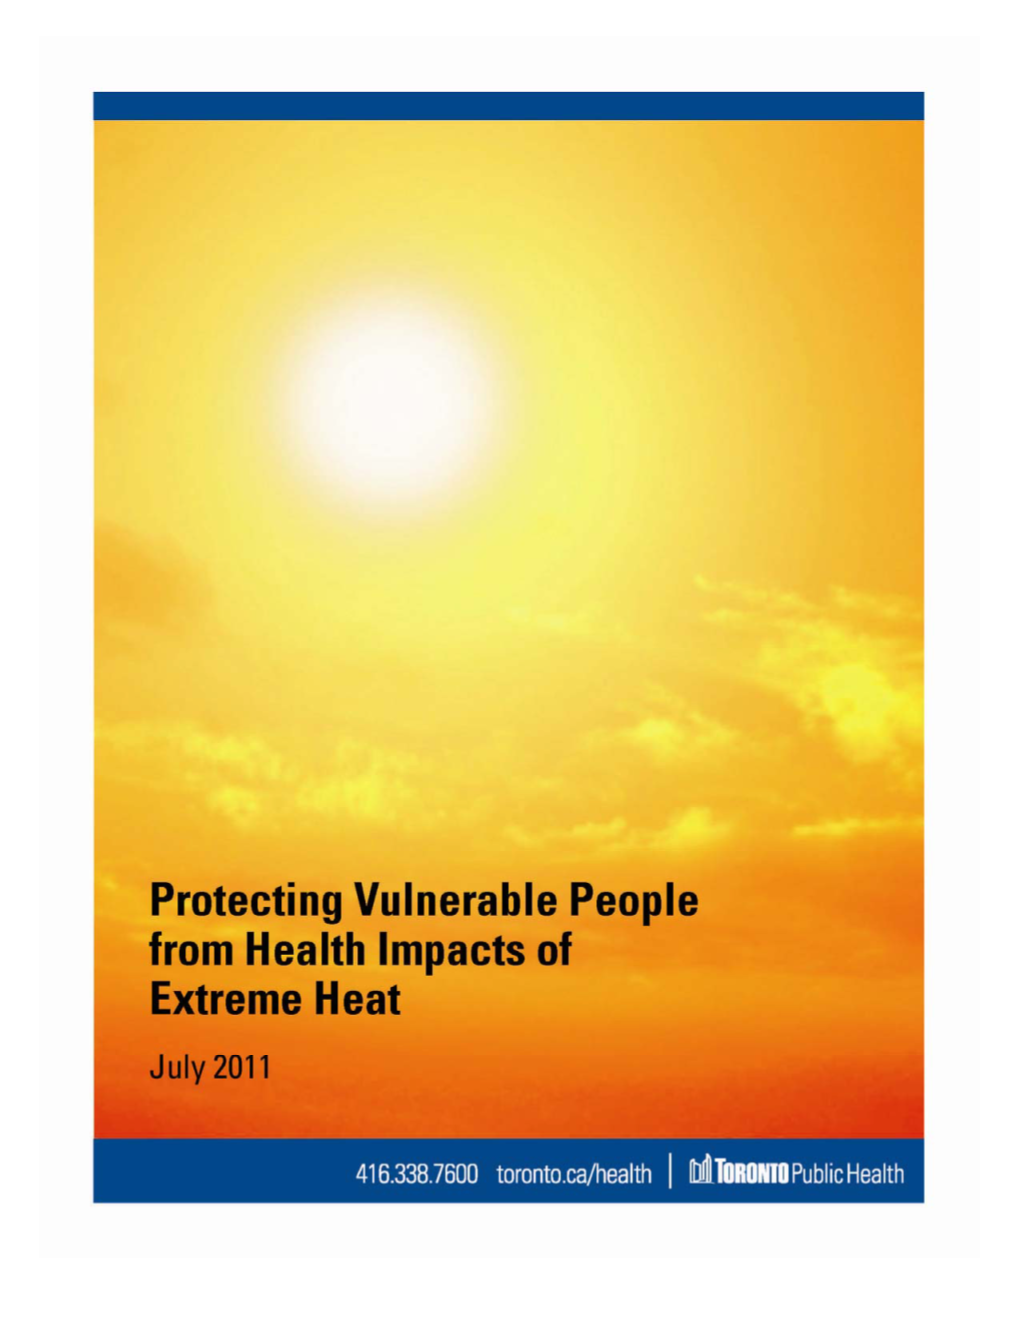 Protecting Vulnerable People from Health Impacts of Extreme Heat